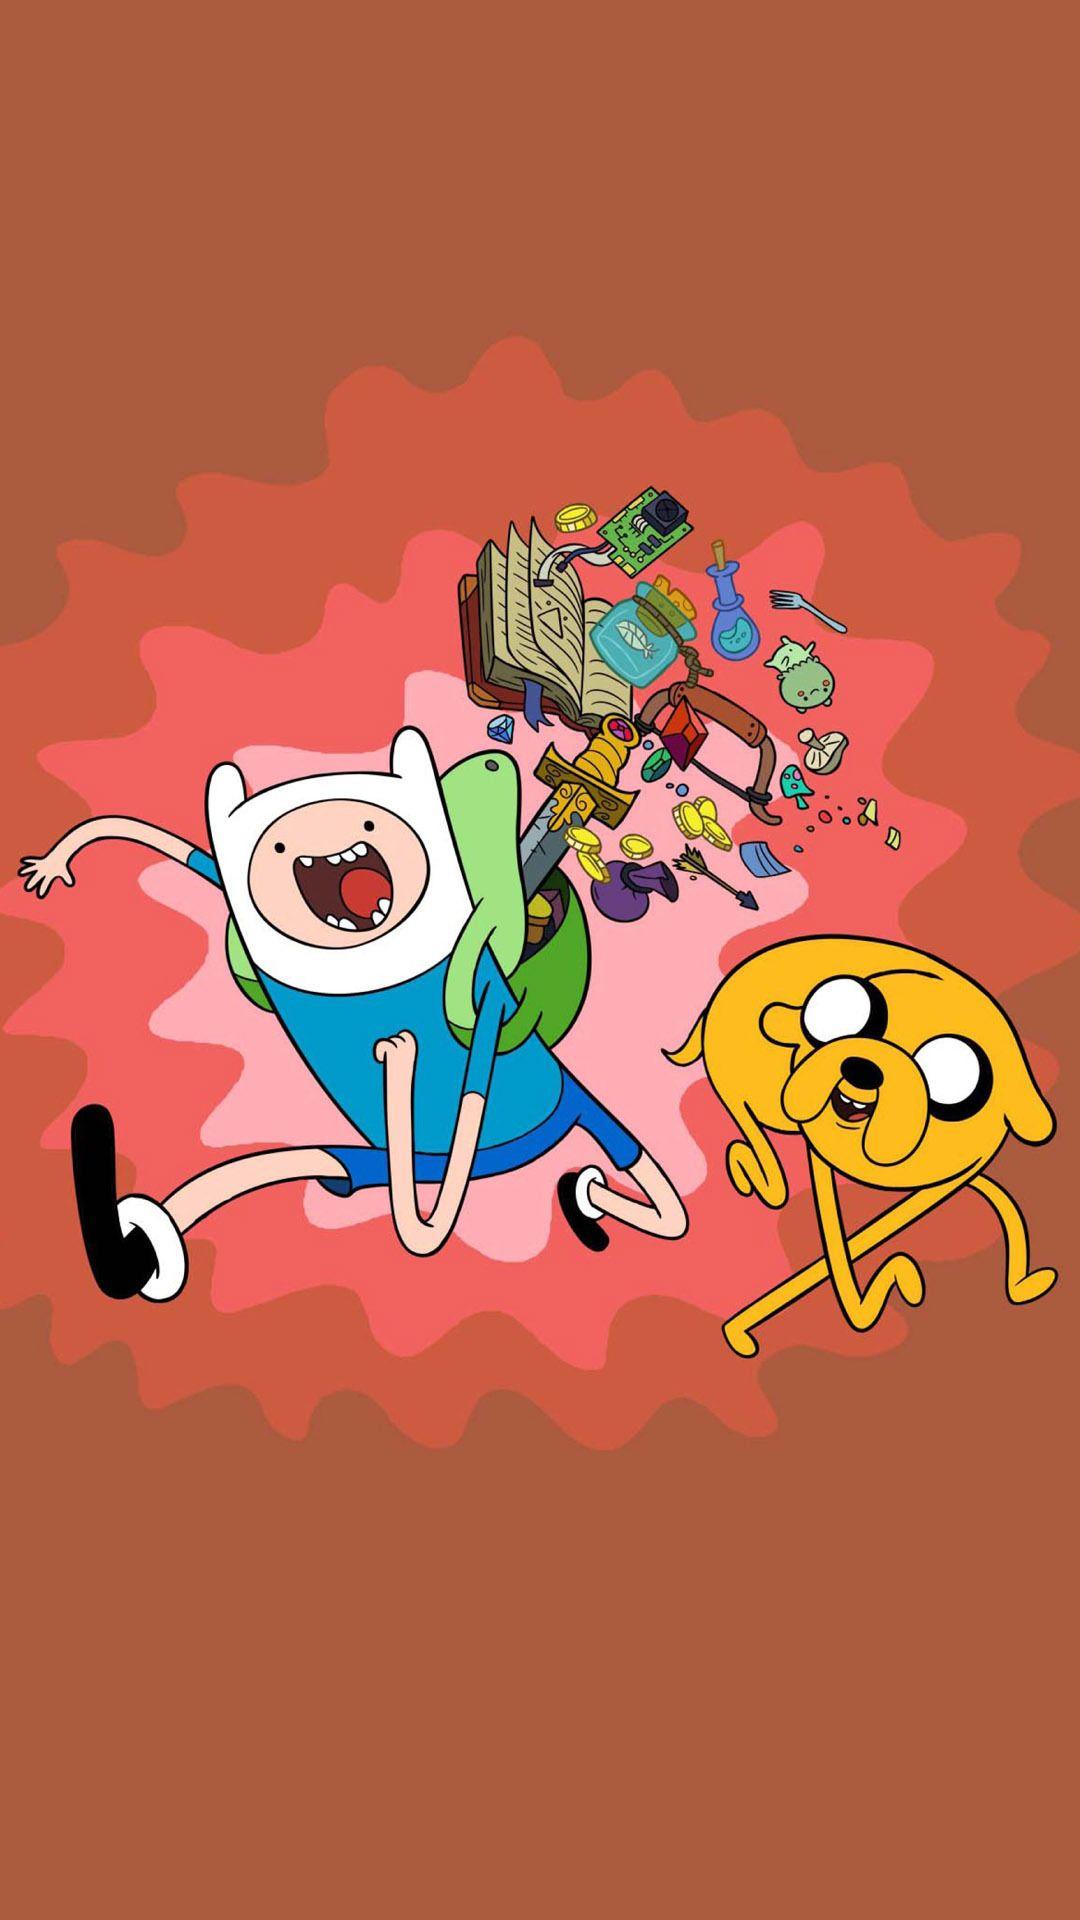 Adventure time wallpaper for mobile phone in 720x1280